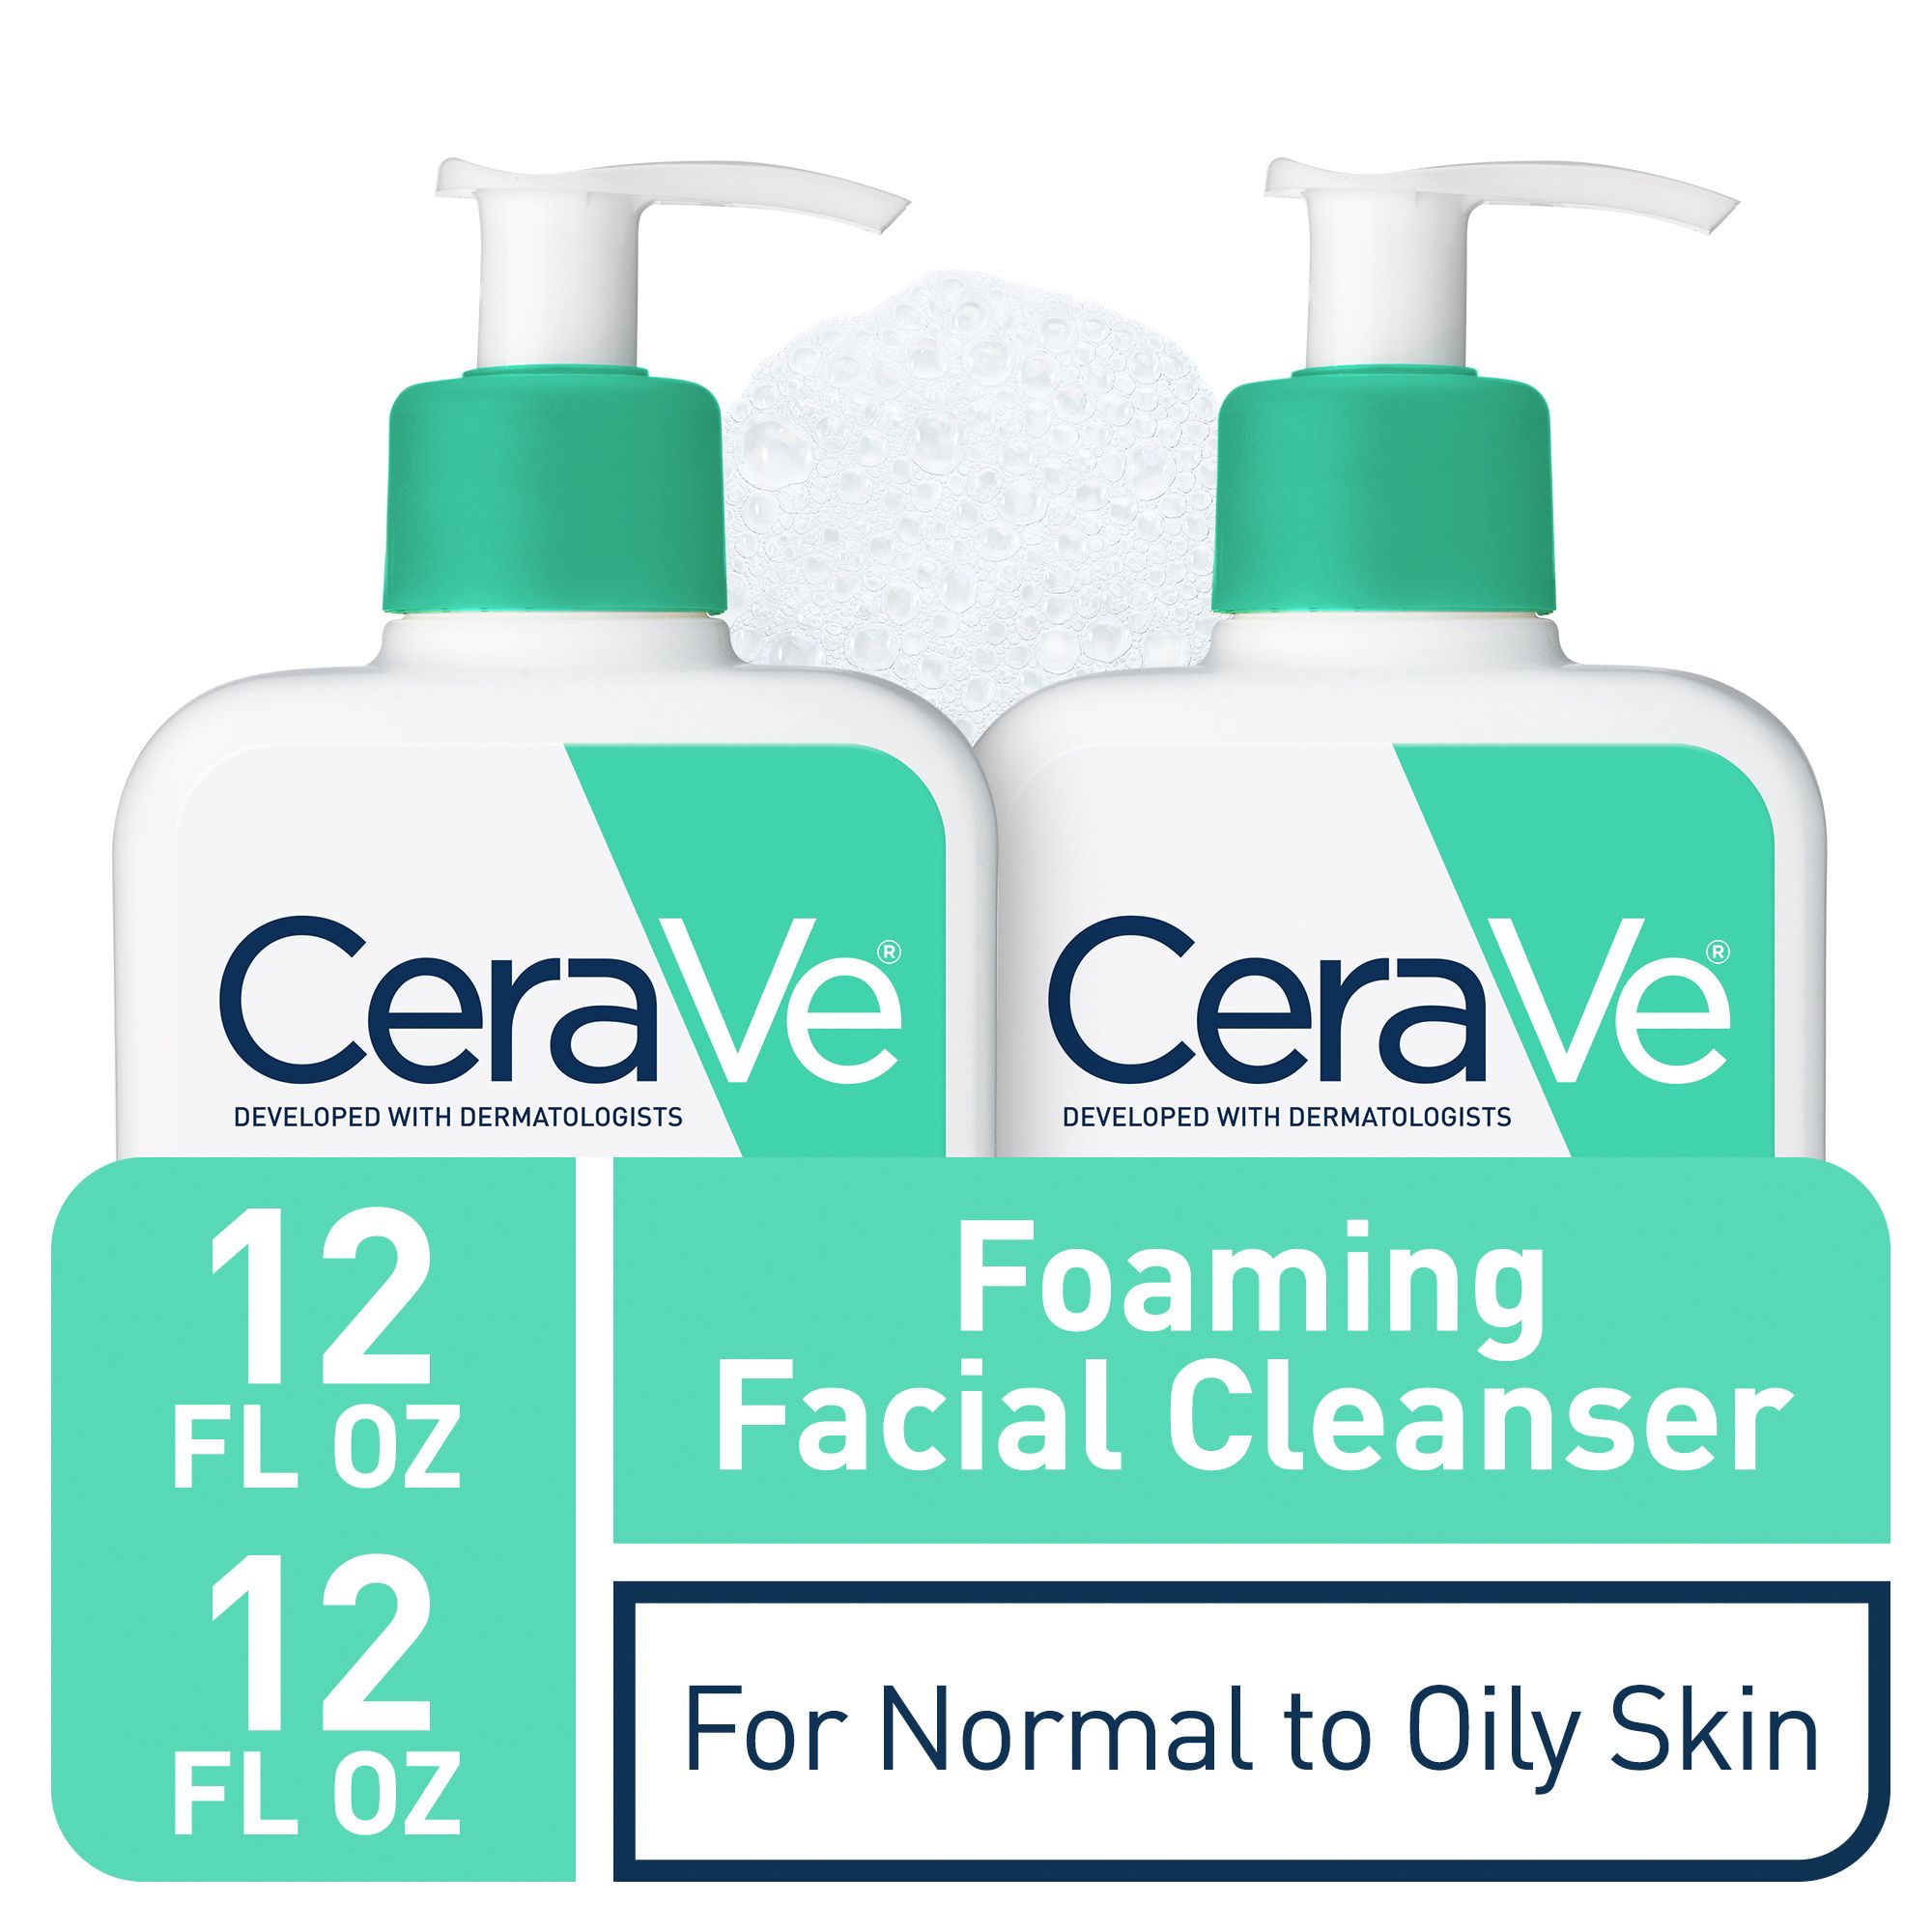  CeraVe Foaming Facial Cleanser, Daily Face Wash for Oily Skin  with Hyaluronic Acid, Ceramides, and Niacinamide, Fragrance Free Paraben  Free